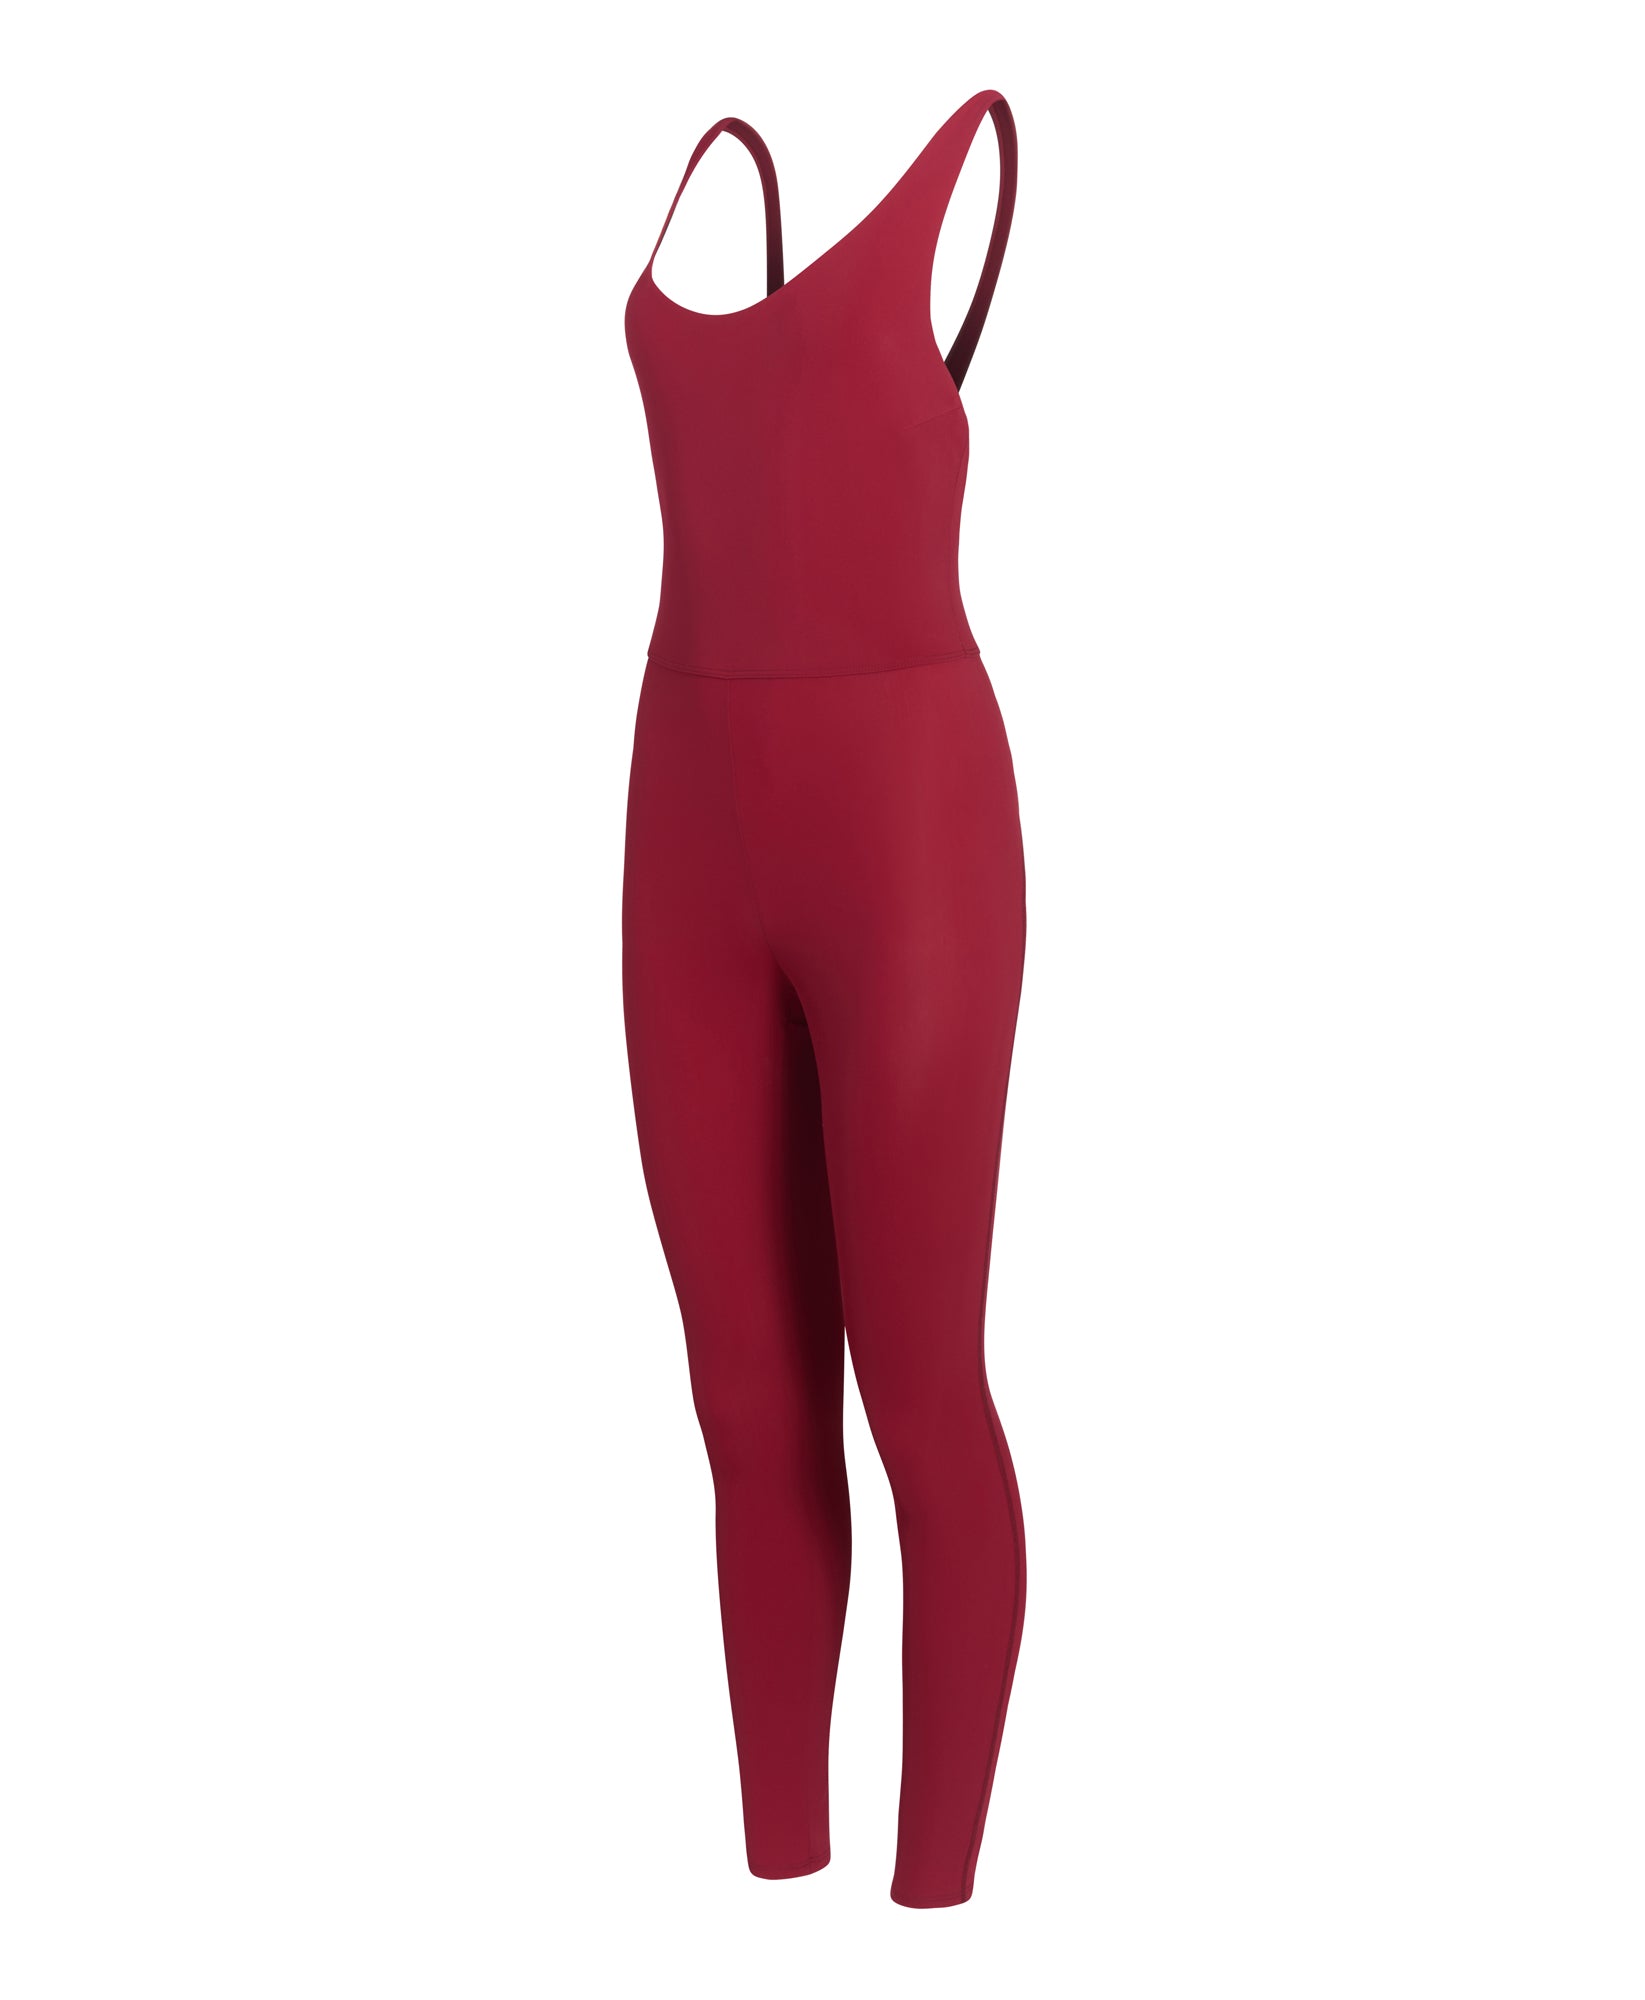 Wear One's At Liberty Unitard in Tango Red on Ghost Mannequin Side